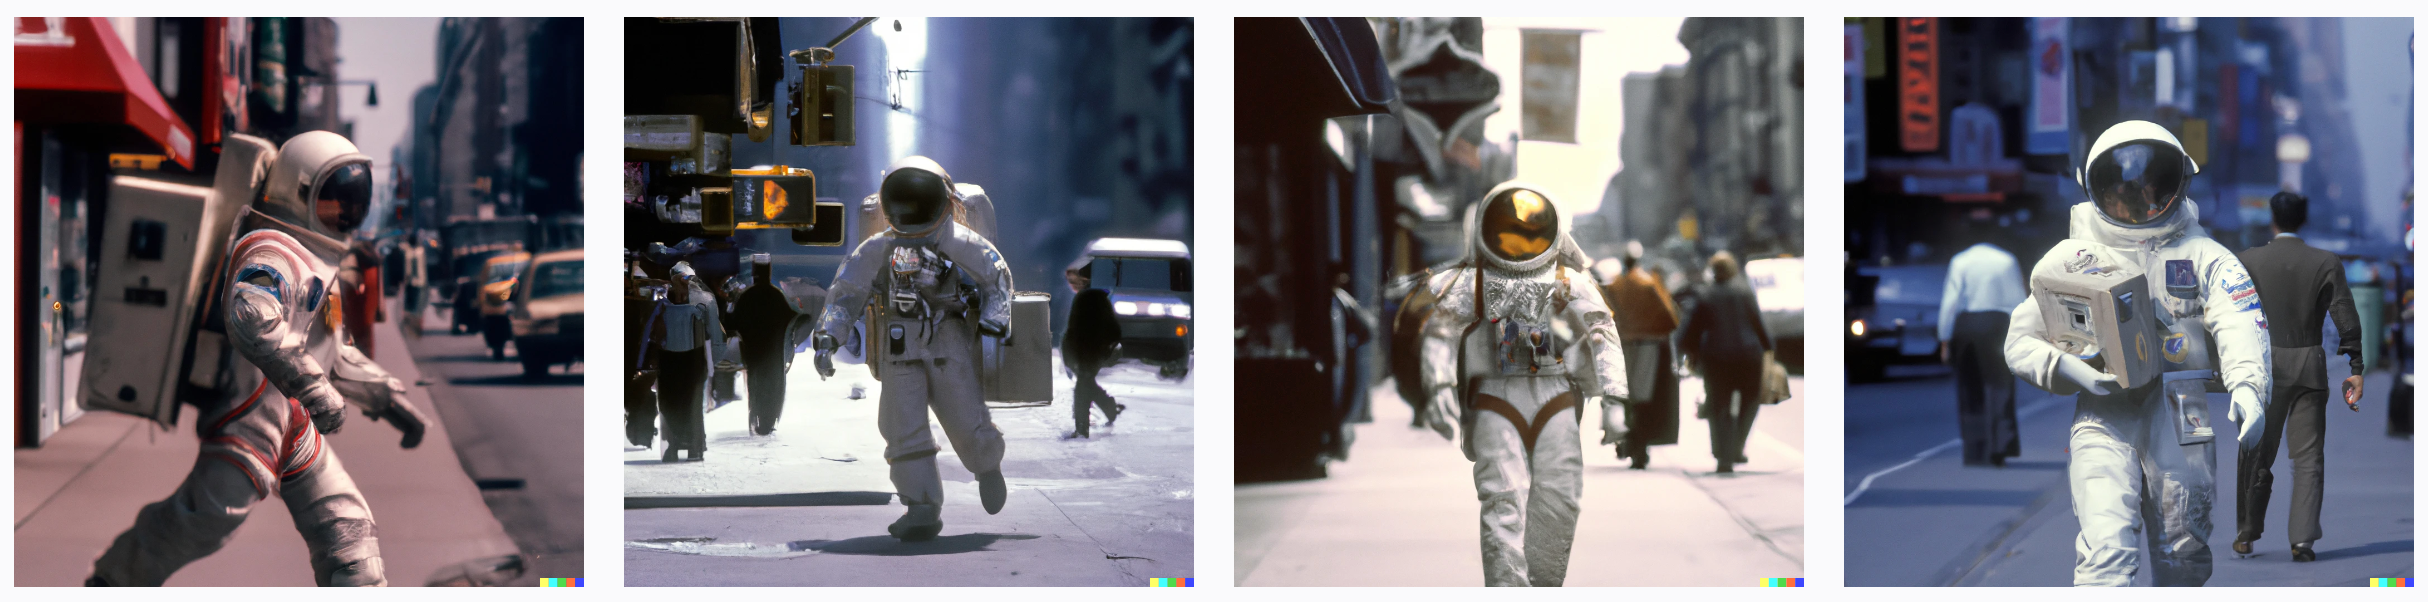 4 images of an astronaut in spacesuit carrying briefcase walking on busy New York street in 1950's. retro, photorealistic Sigma 85 mm f/8